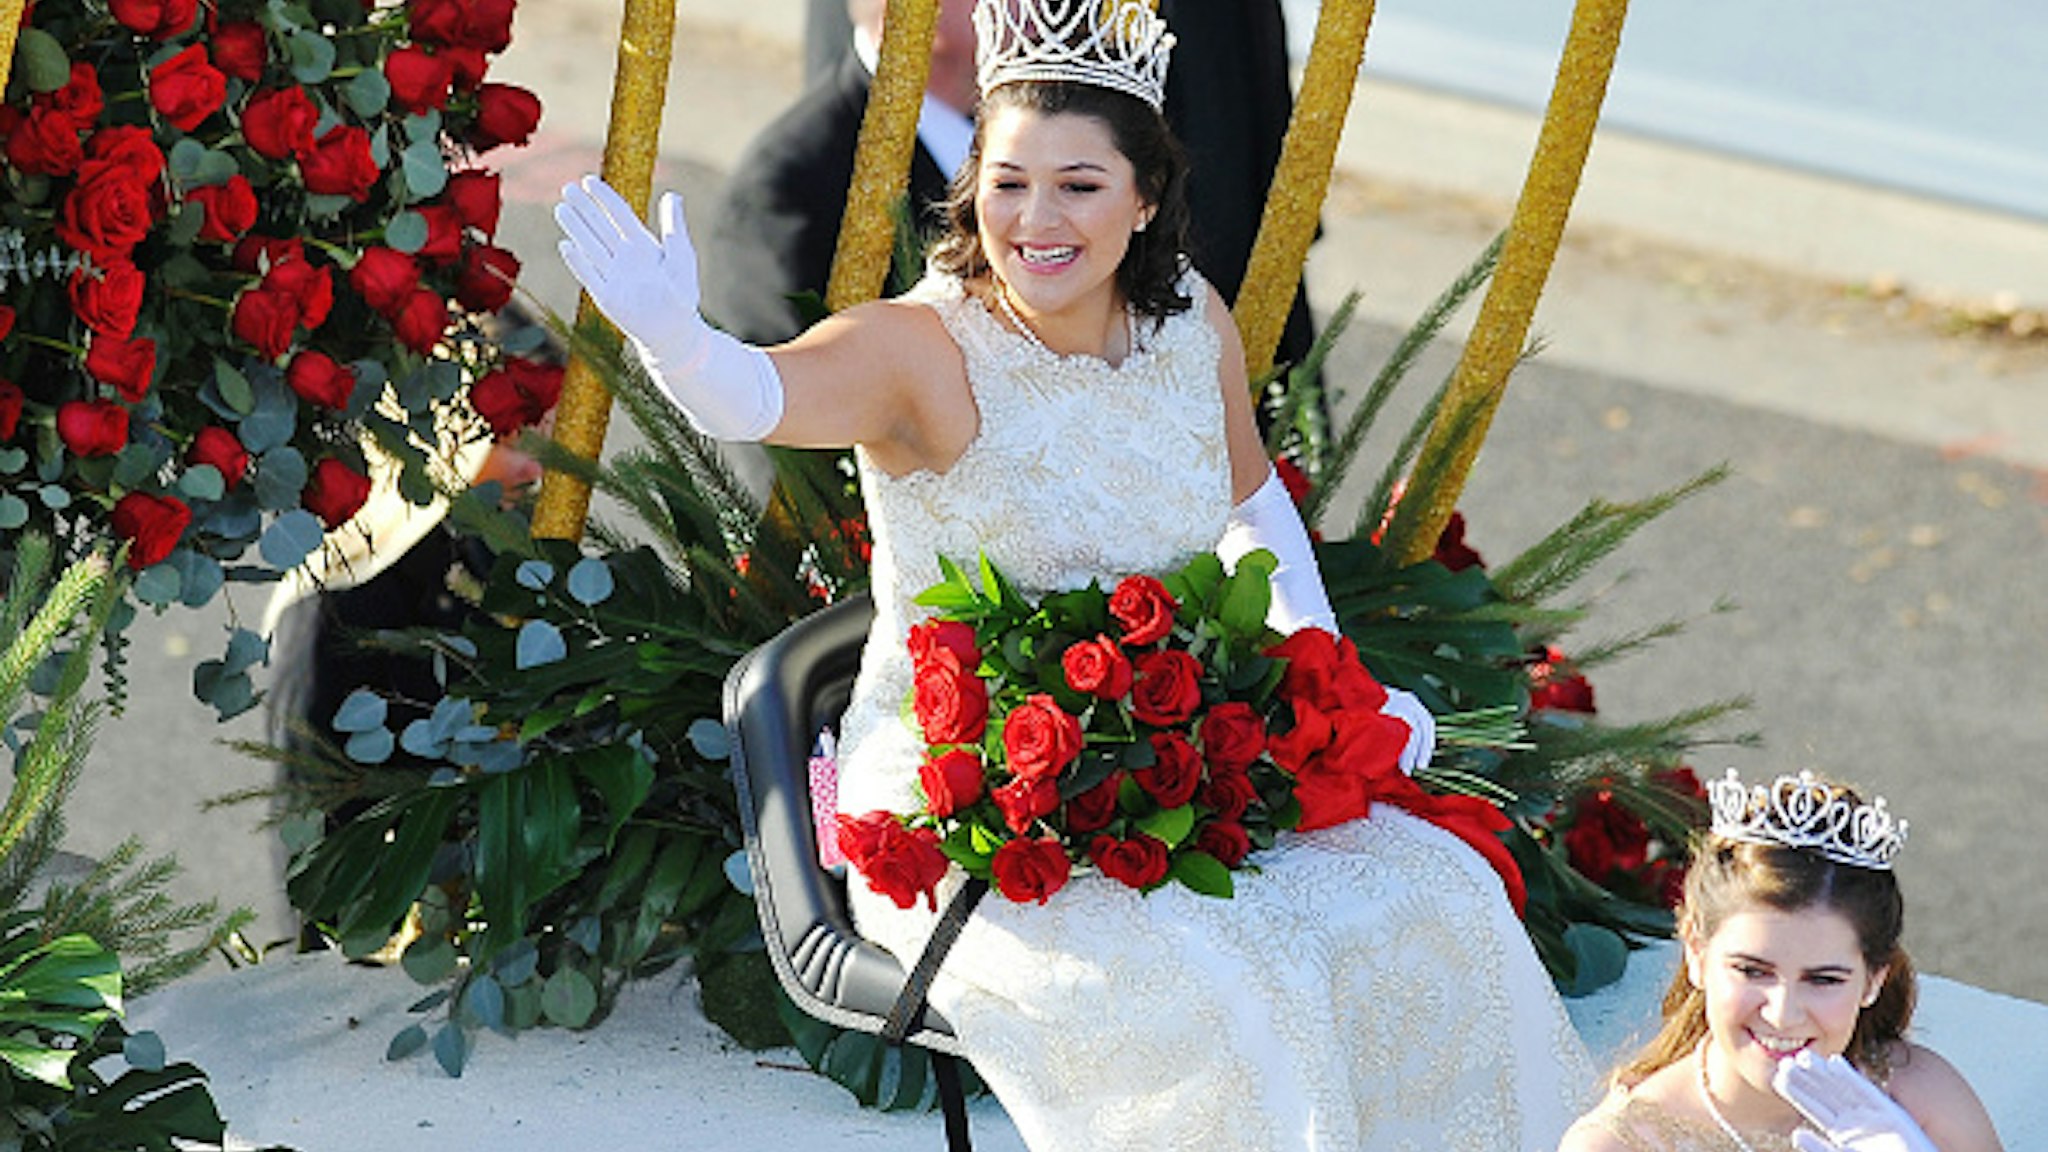 PASADENA, CA - JANUARY 01: Rose Queen Isabella participates in the 2018 Tournament Of Roses Parade Presented By Honda on January 1, 2018 in Pasadena, California.